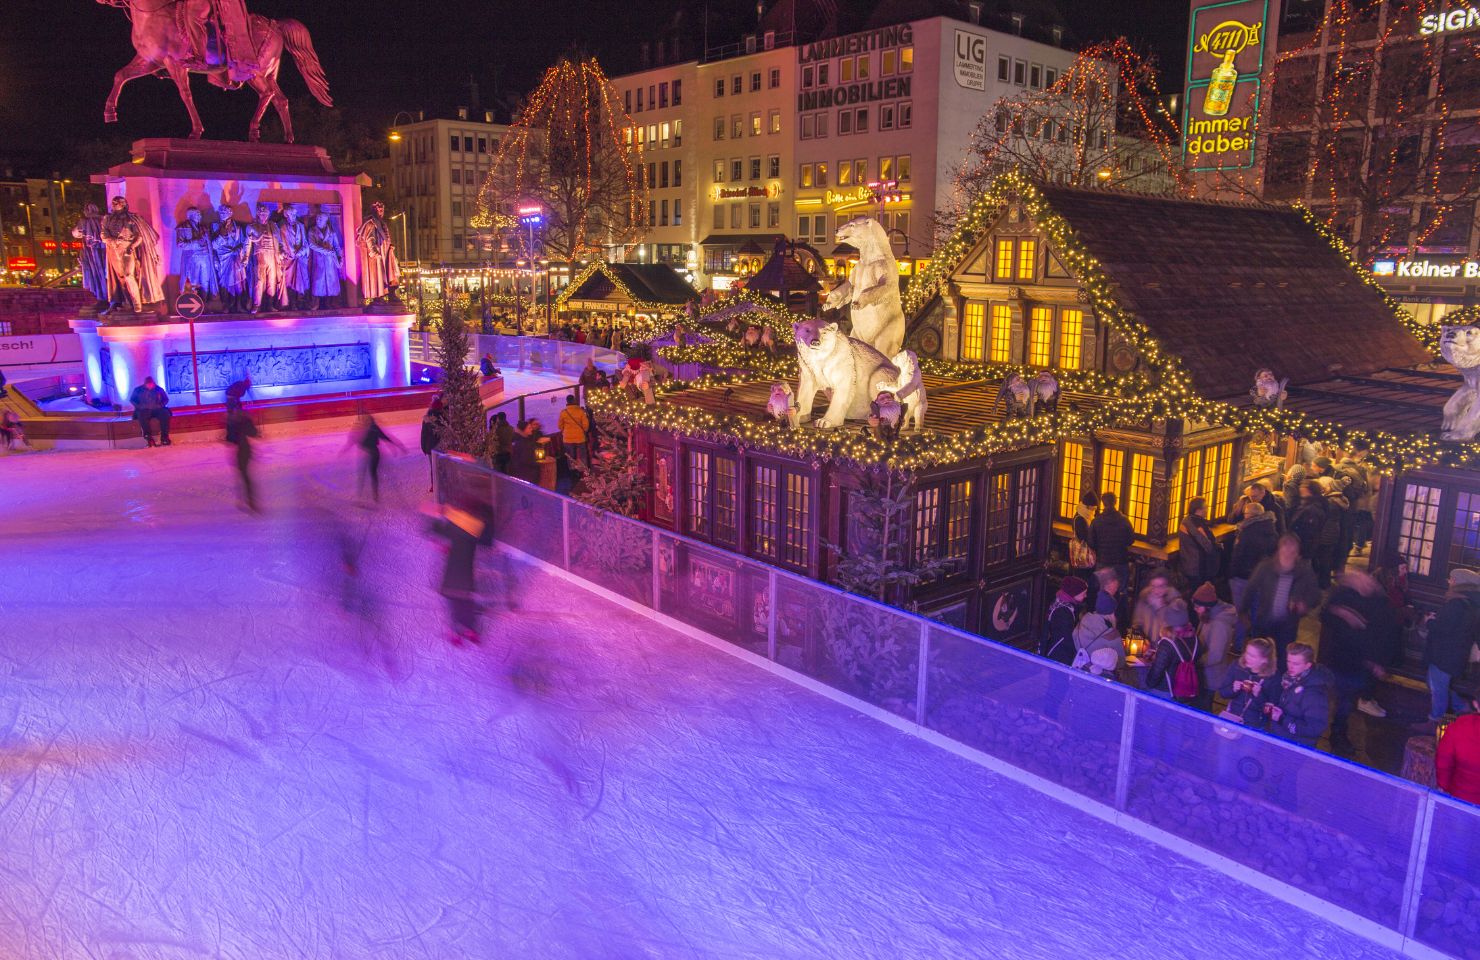 Ice skating rink at the Heumarkt in Cologne